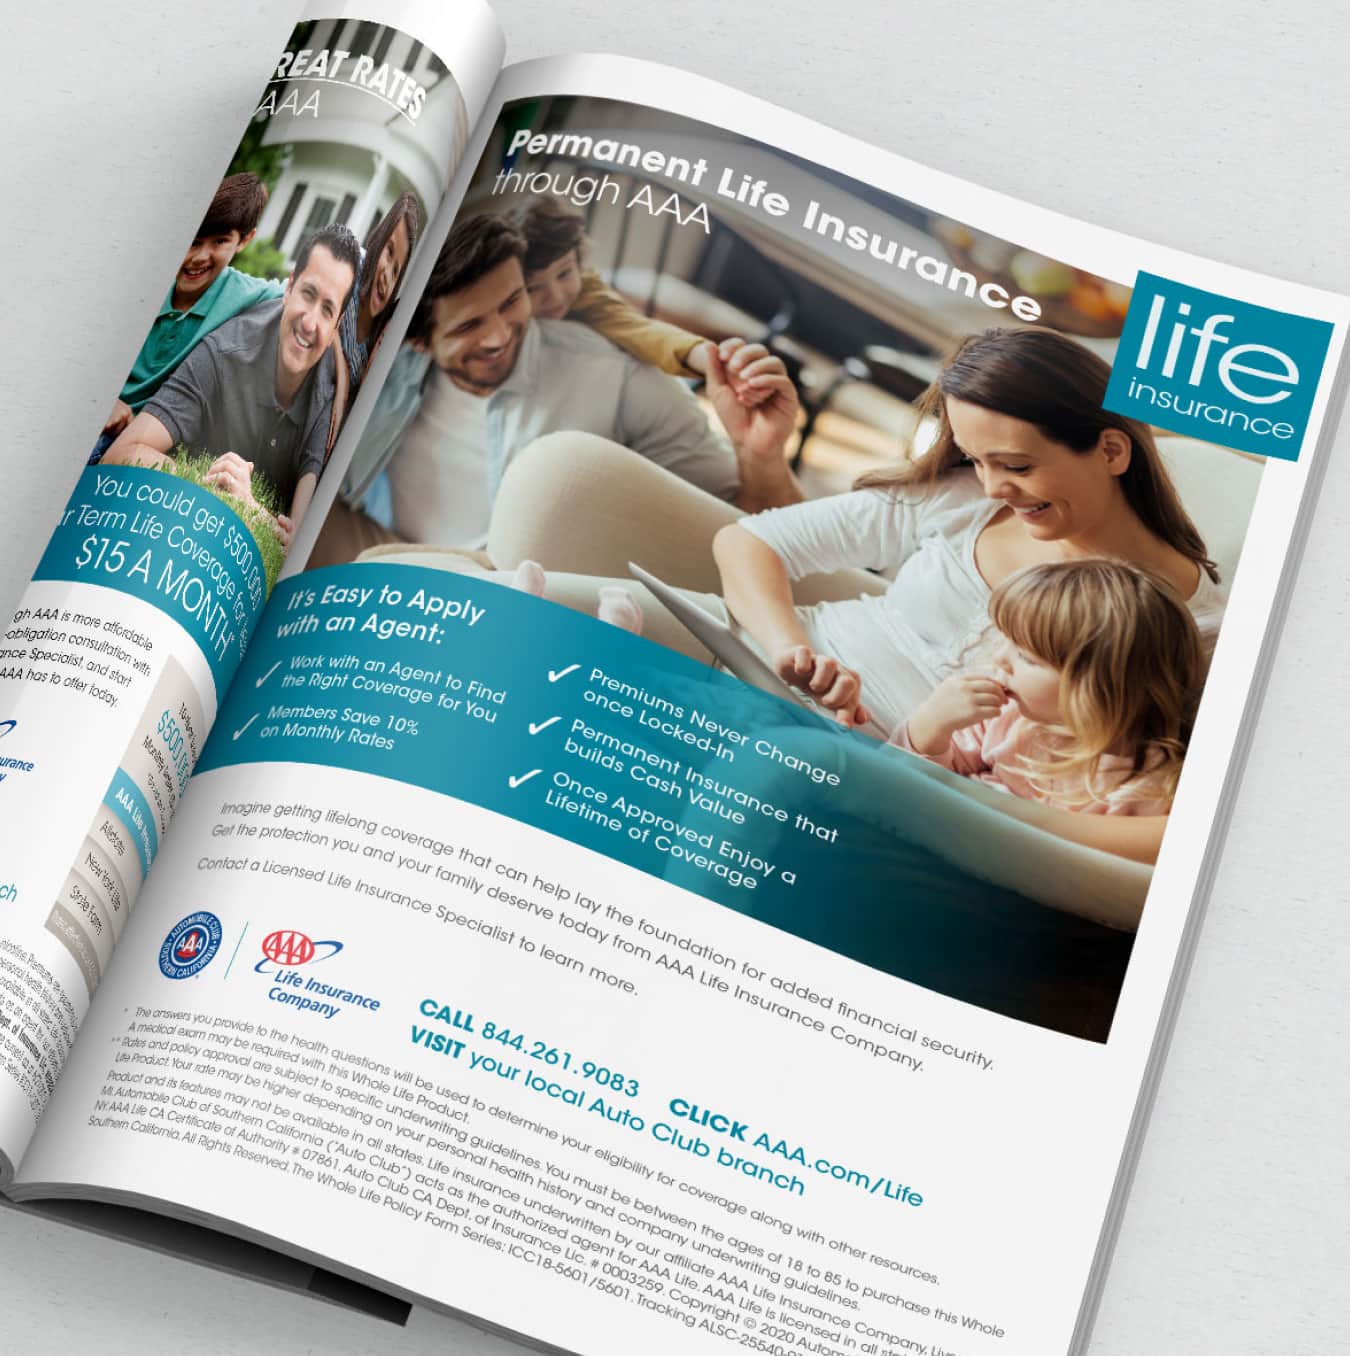 A magazine spread open to an advertisement for permanent life insurance through AAA, showing images of a happy family and providing contact information and pricing details.